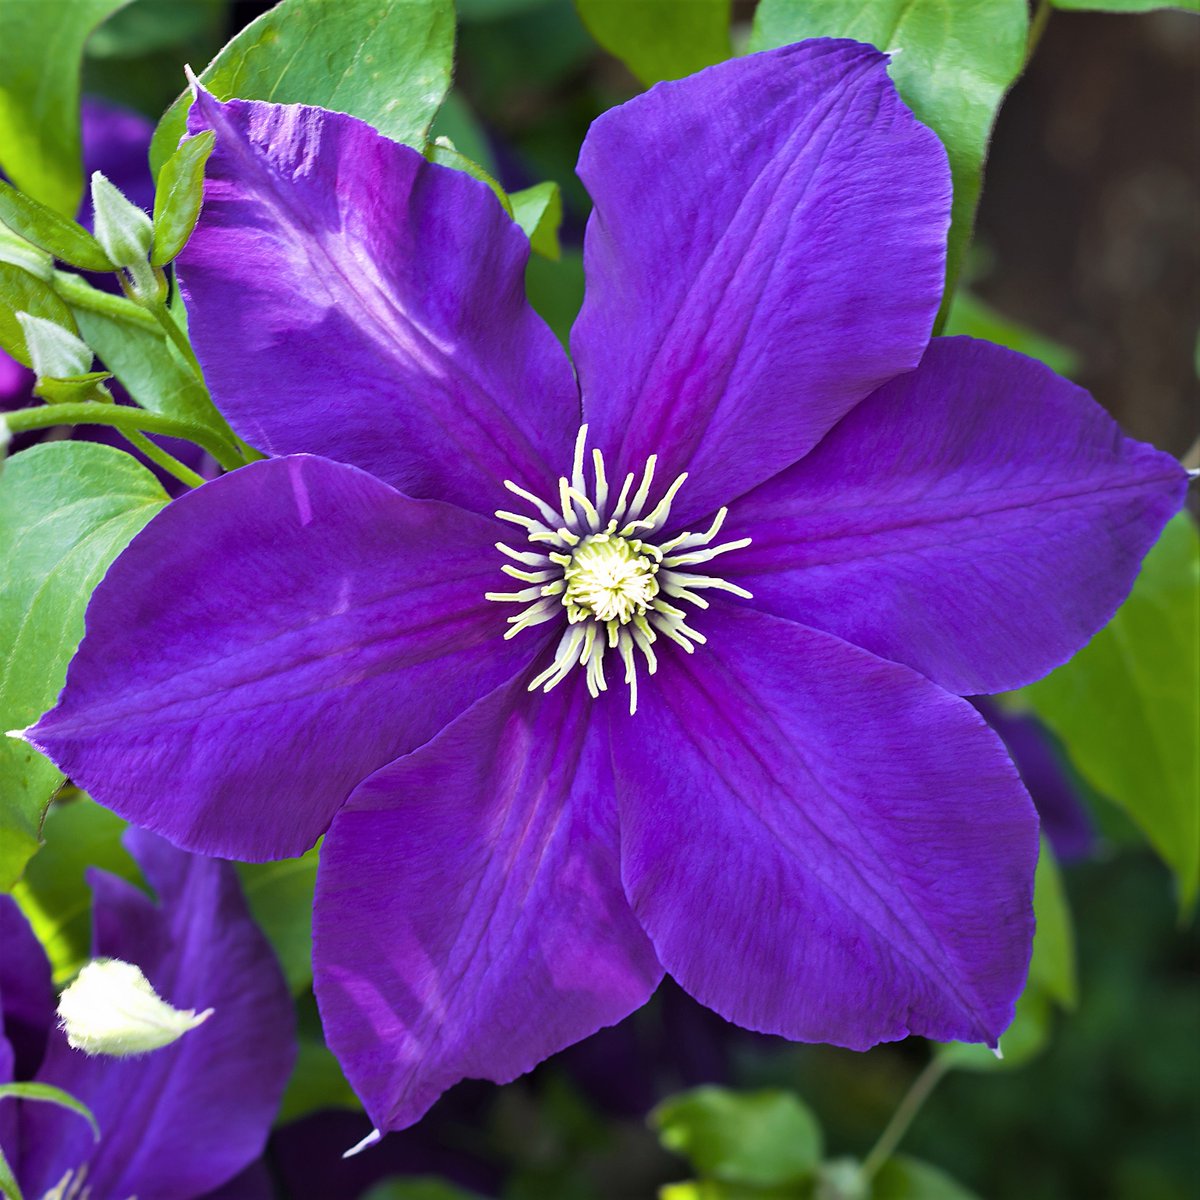 CHARLIE: Clematis, symbolizing ingenuity and mental beauty